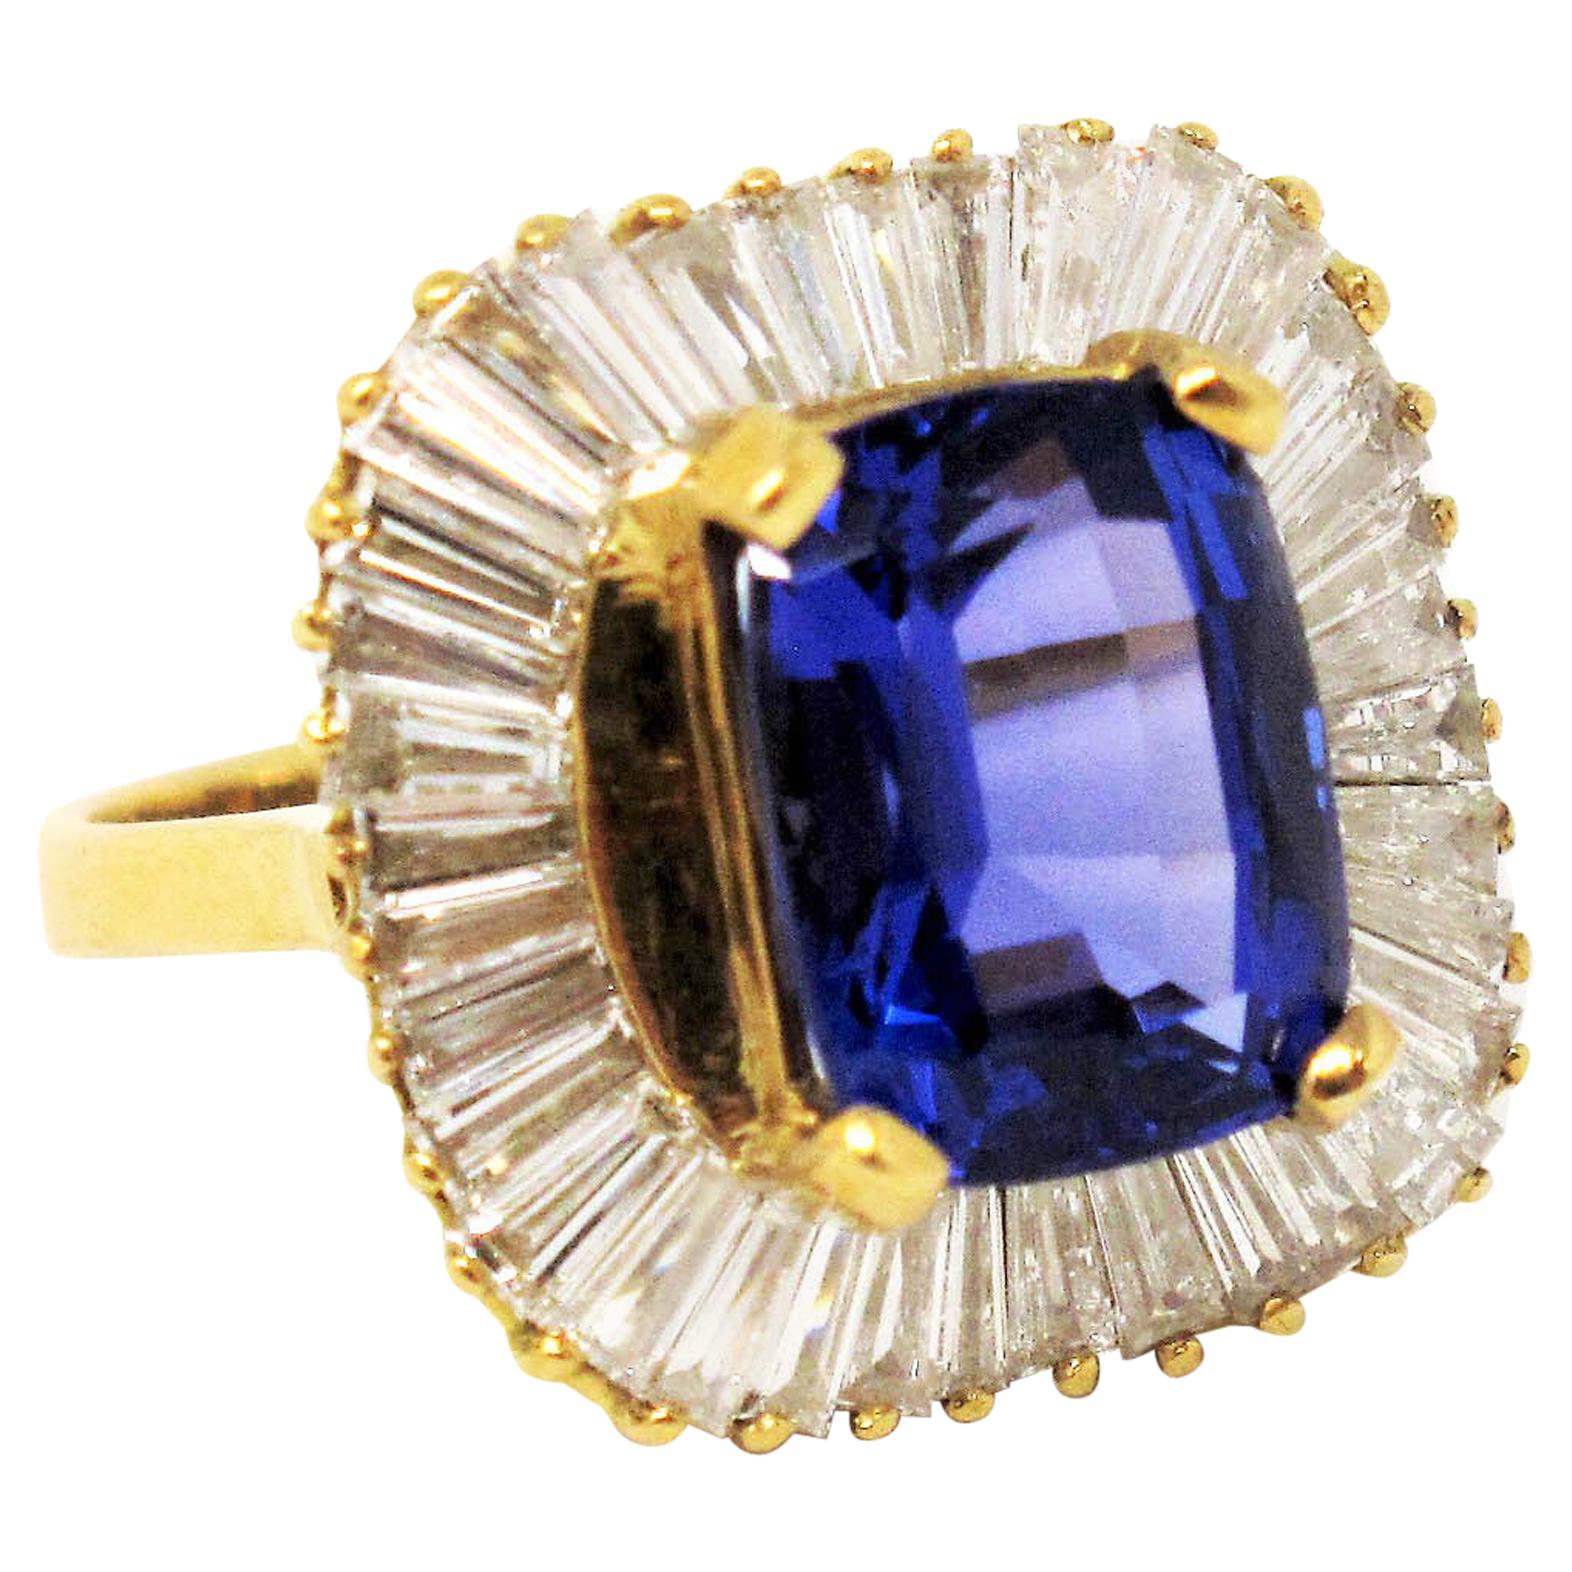 Old Hollywood glamour meets modern day elegance in this absolute showstopper of a ring. The sizeable cushion cut violet tanzanite stone at the center radiates among the unique bright white baguette diamond halo. The bold sophistication of this Le